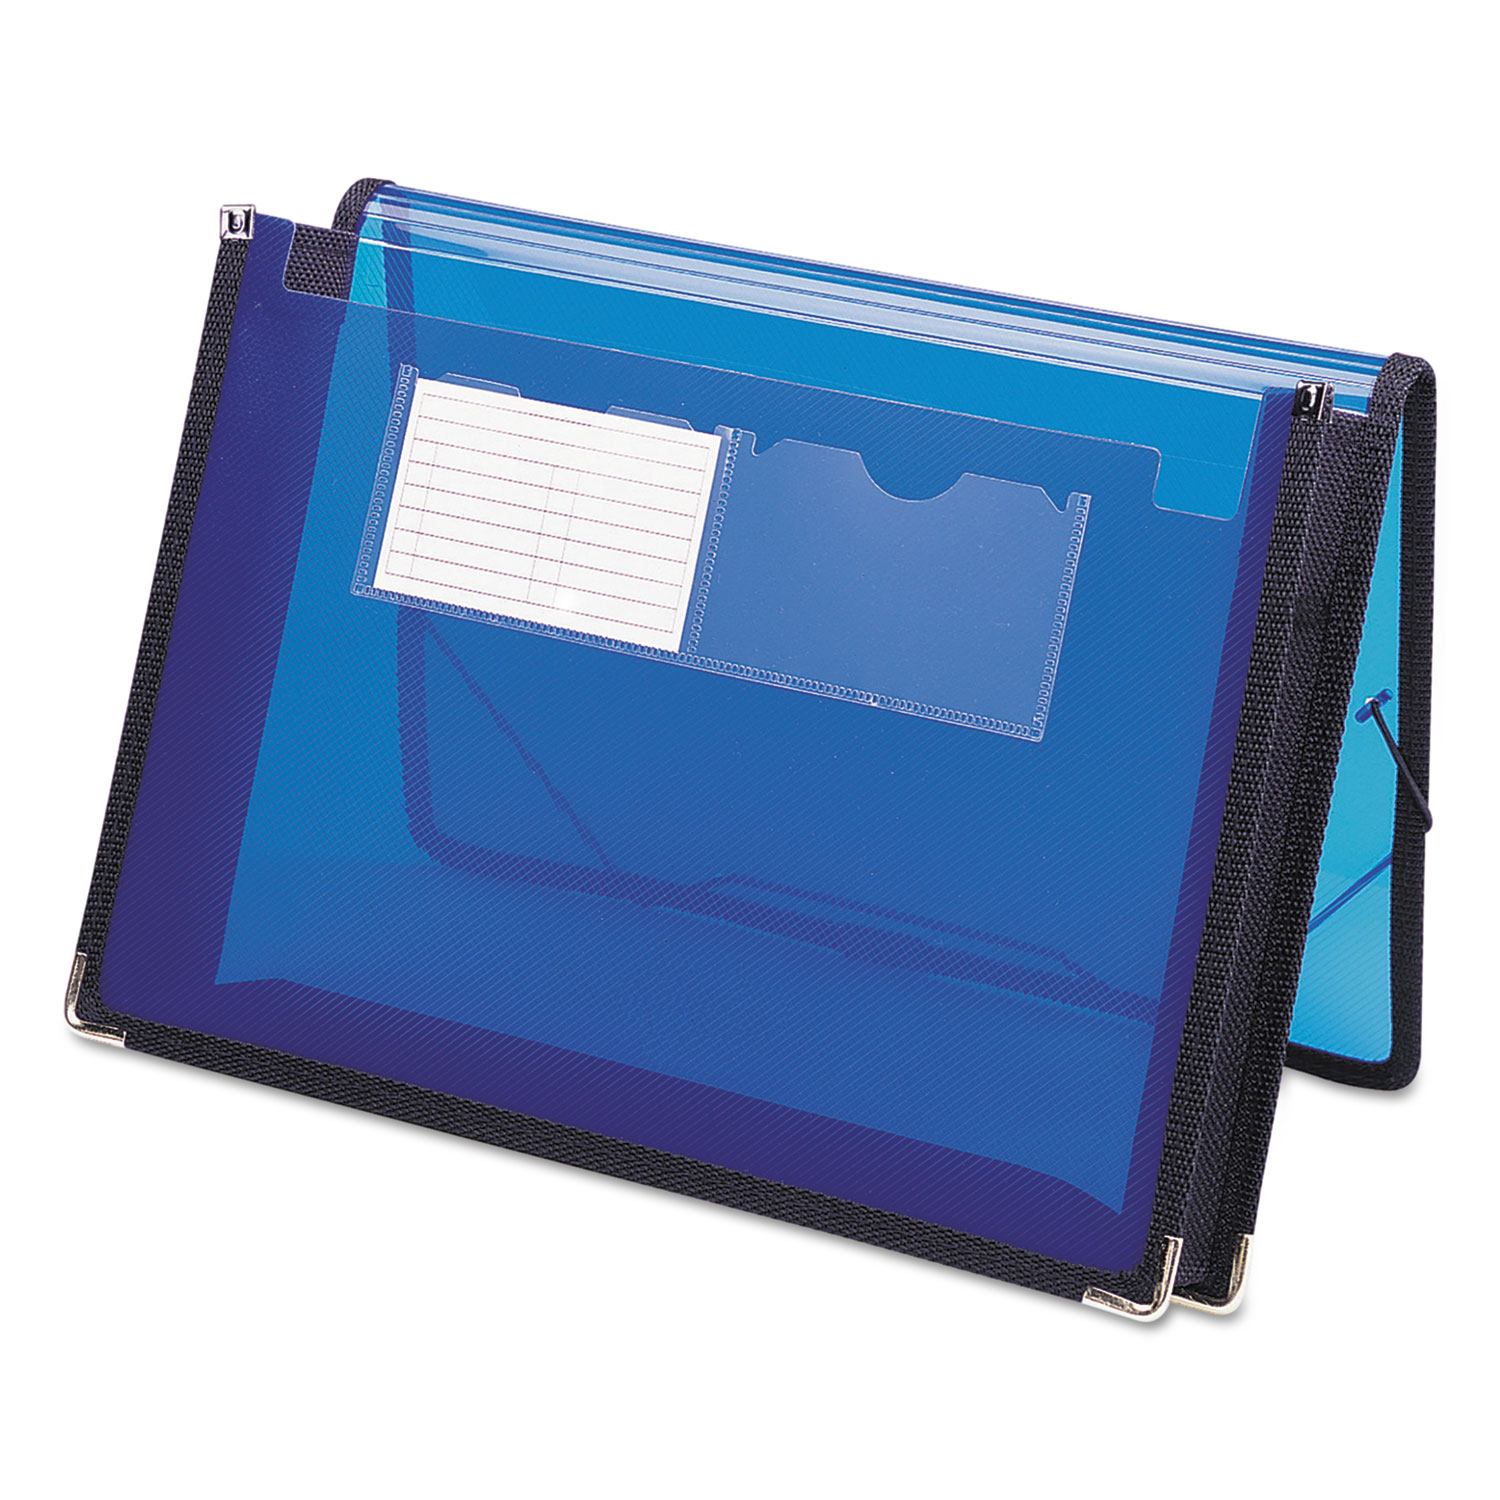  Smead 71953 Poly Wallets, 2.25 Expansion, 1 Section, Letter Size, Translucent Blue (SMD71953) 